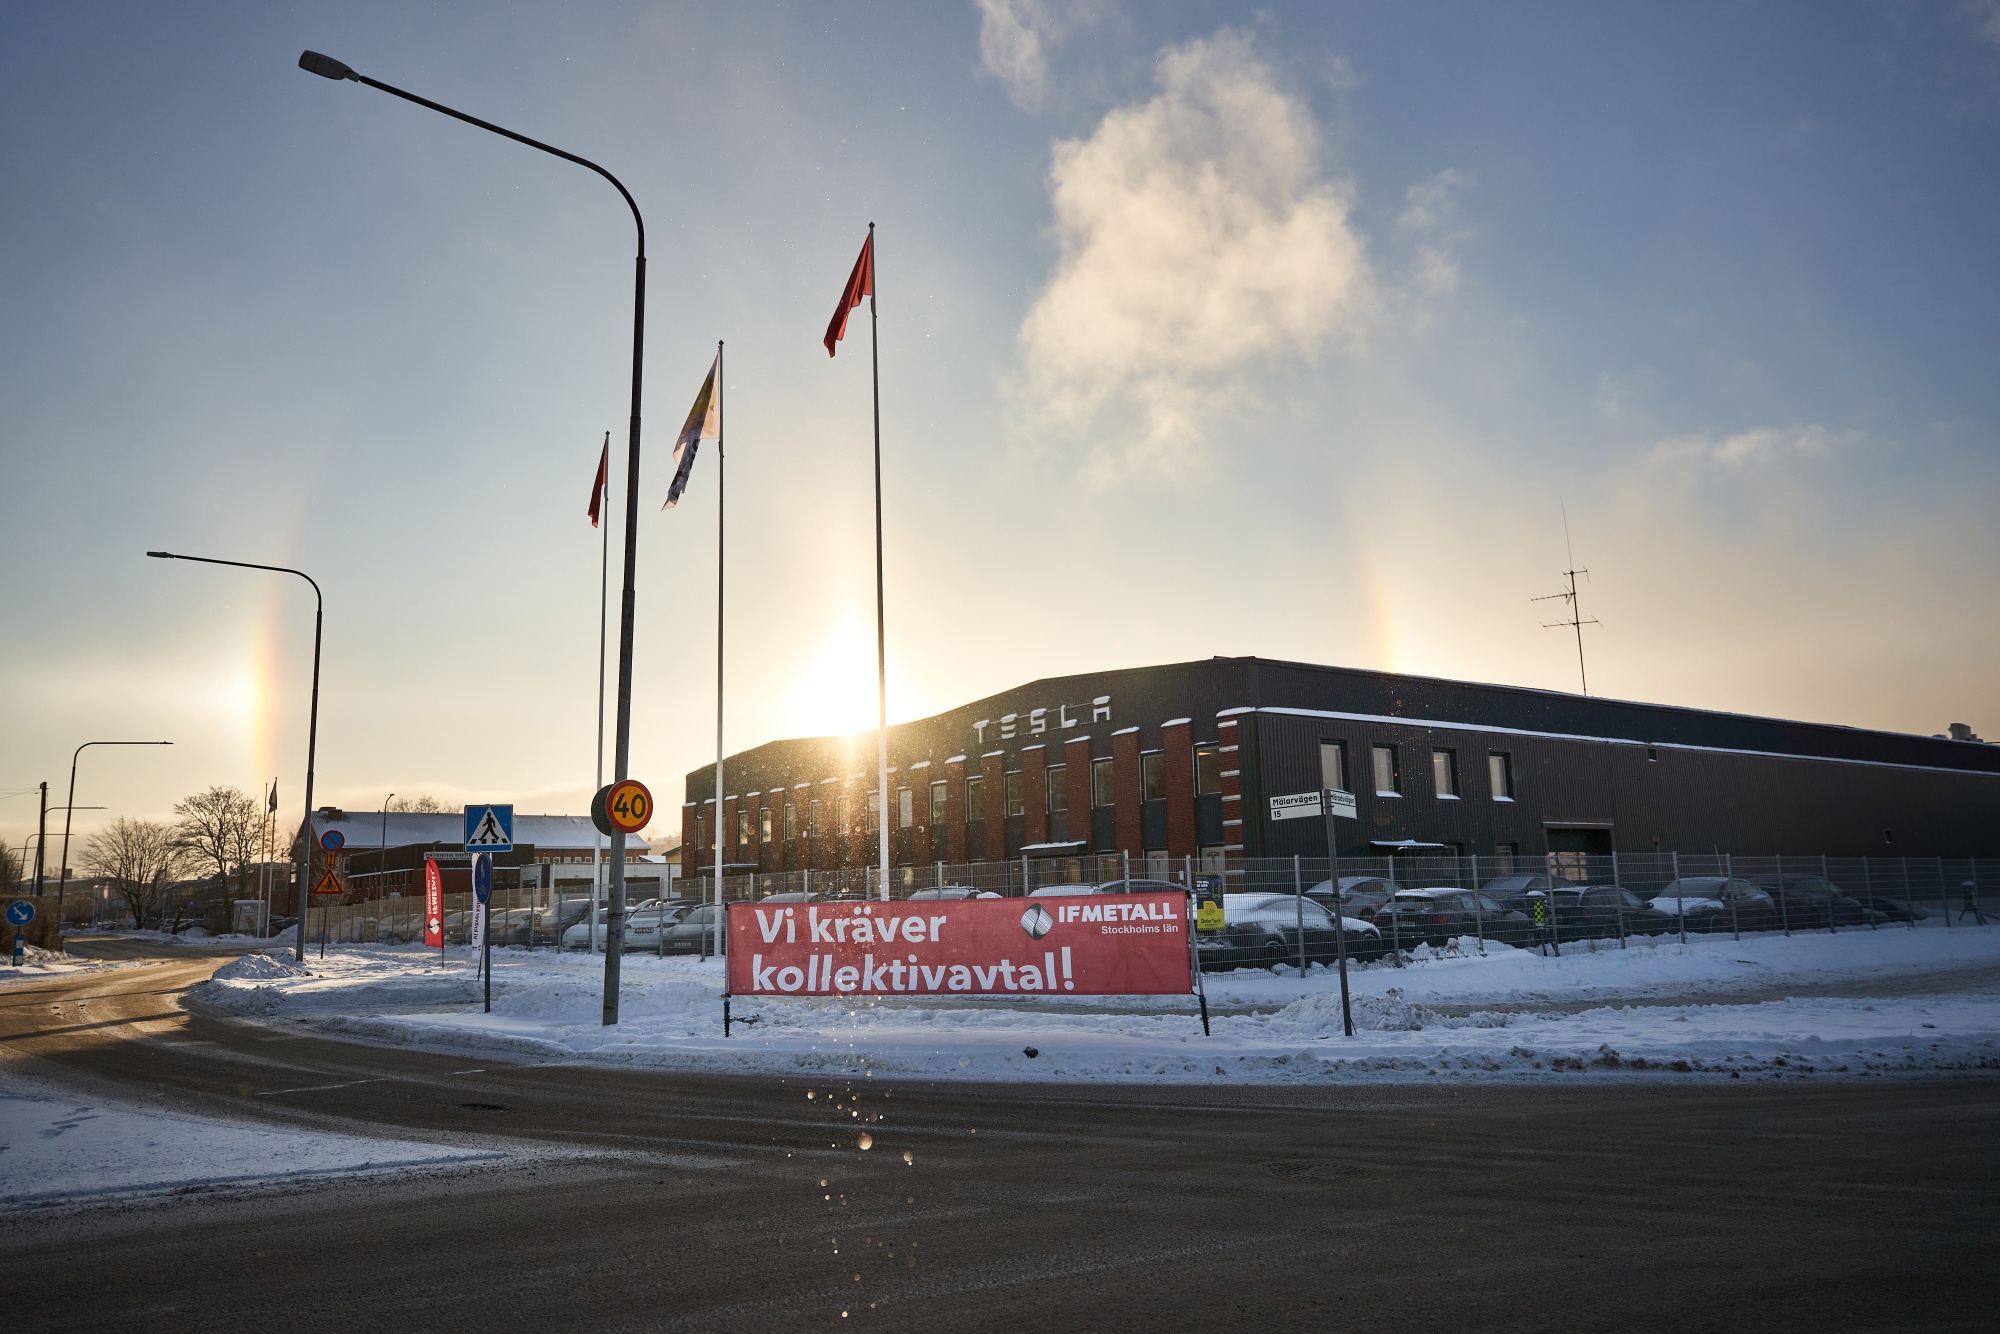 A banner from IF Metall union reading "We Demand a Collective Agreement" during a labor protest outside the Tesla Inc. service center in Segeltorp, Sweden, on Dec. 5.